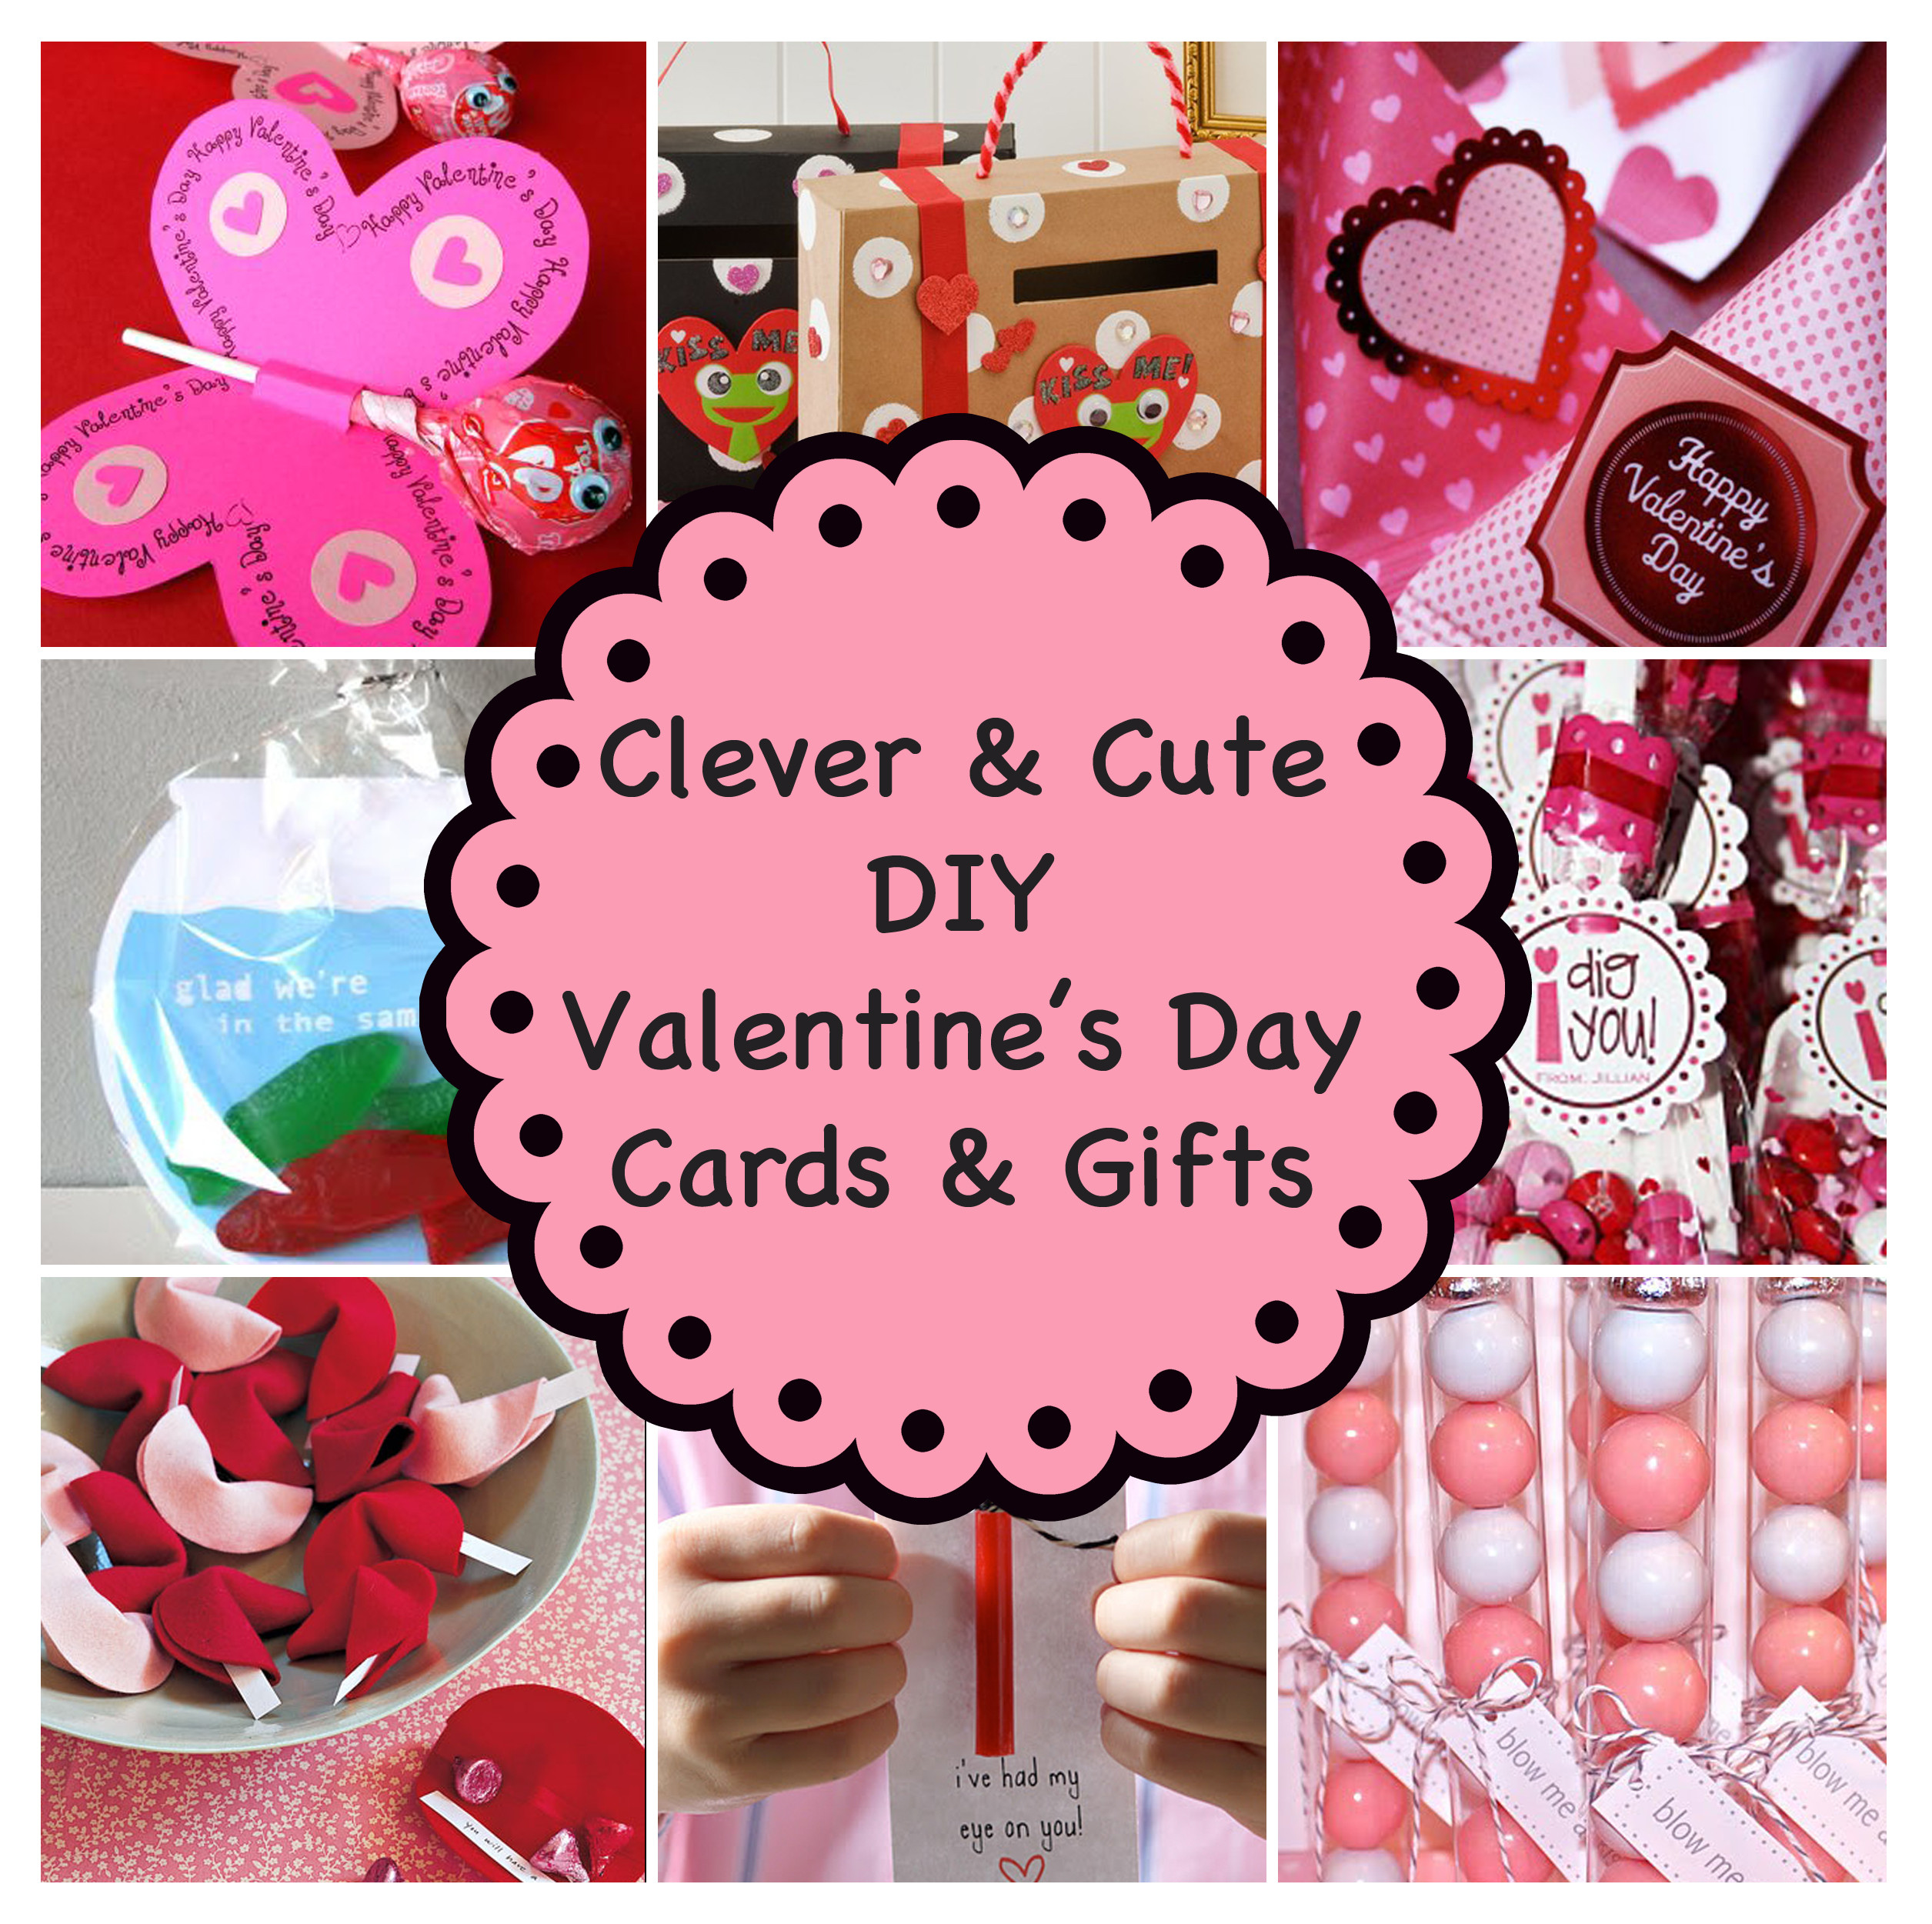 Cute Valentines Day Ideas
 Clever and Cute DIY Valentine’s Day Cards & Gifts